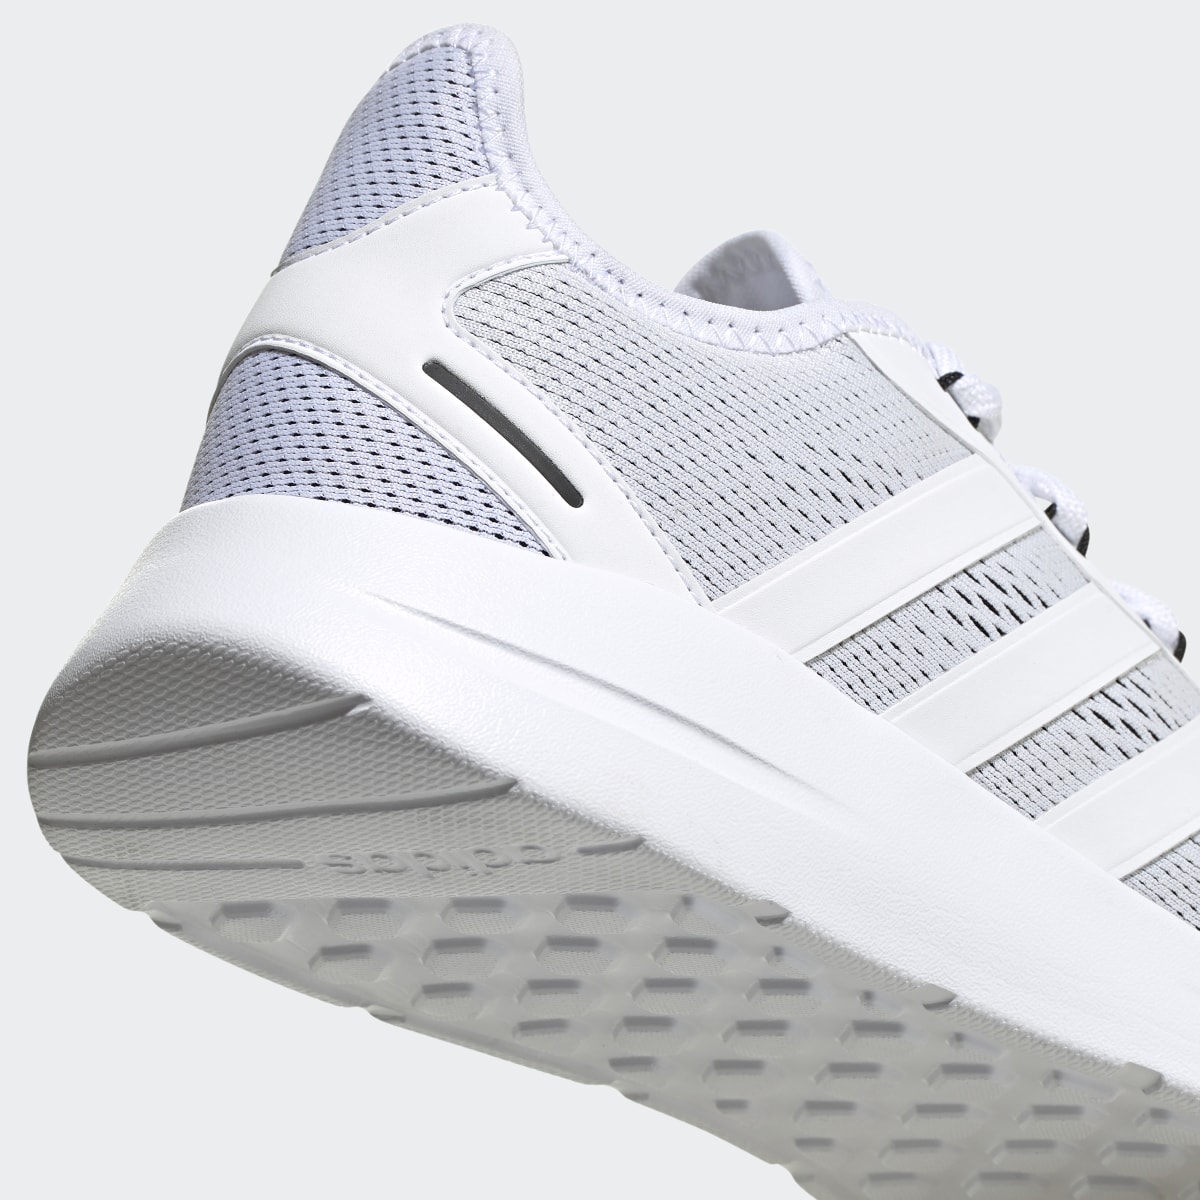 Adidas Lite Racer RBN 2.0 Shoes. 9